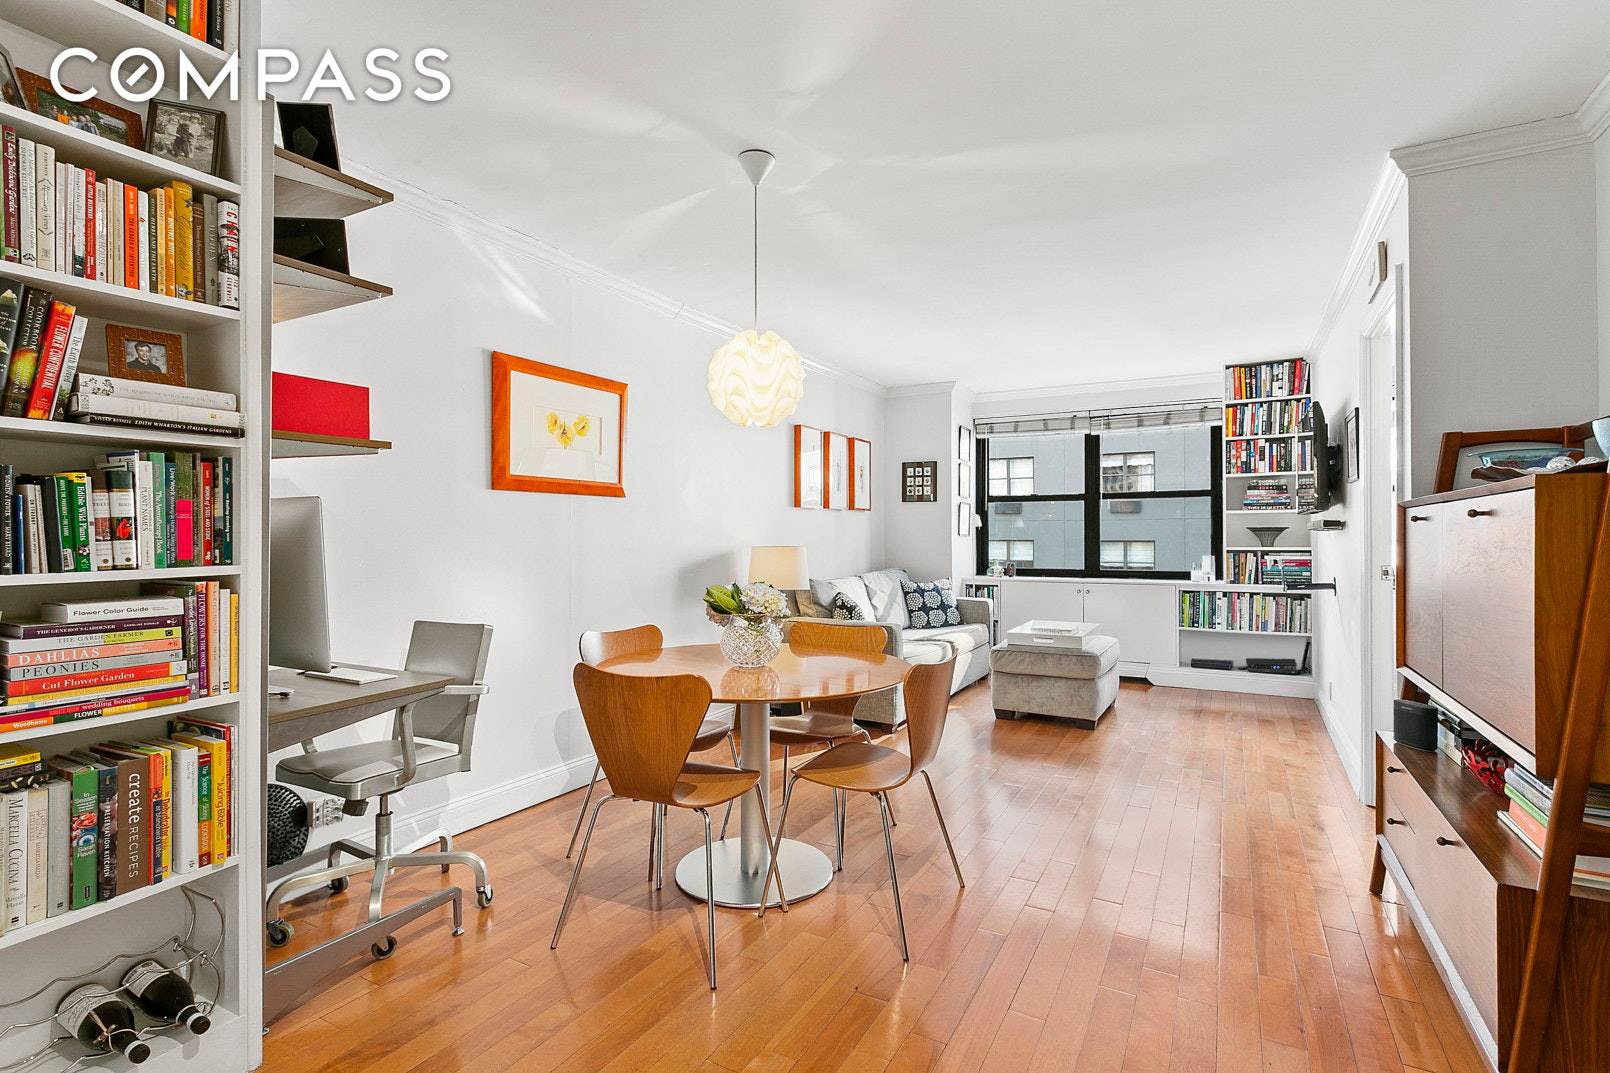 This bright and airy one bedroom, one bathroom residence offers a gracious layout in a Full Service building nestled perfectly on the Gramercy Kips Bay border.